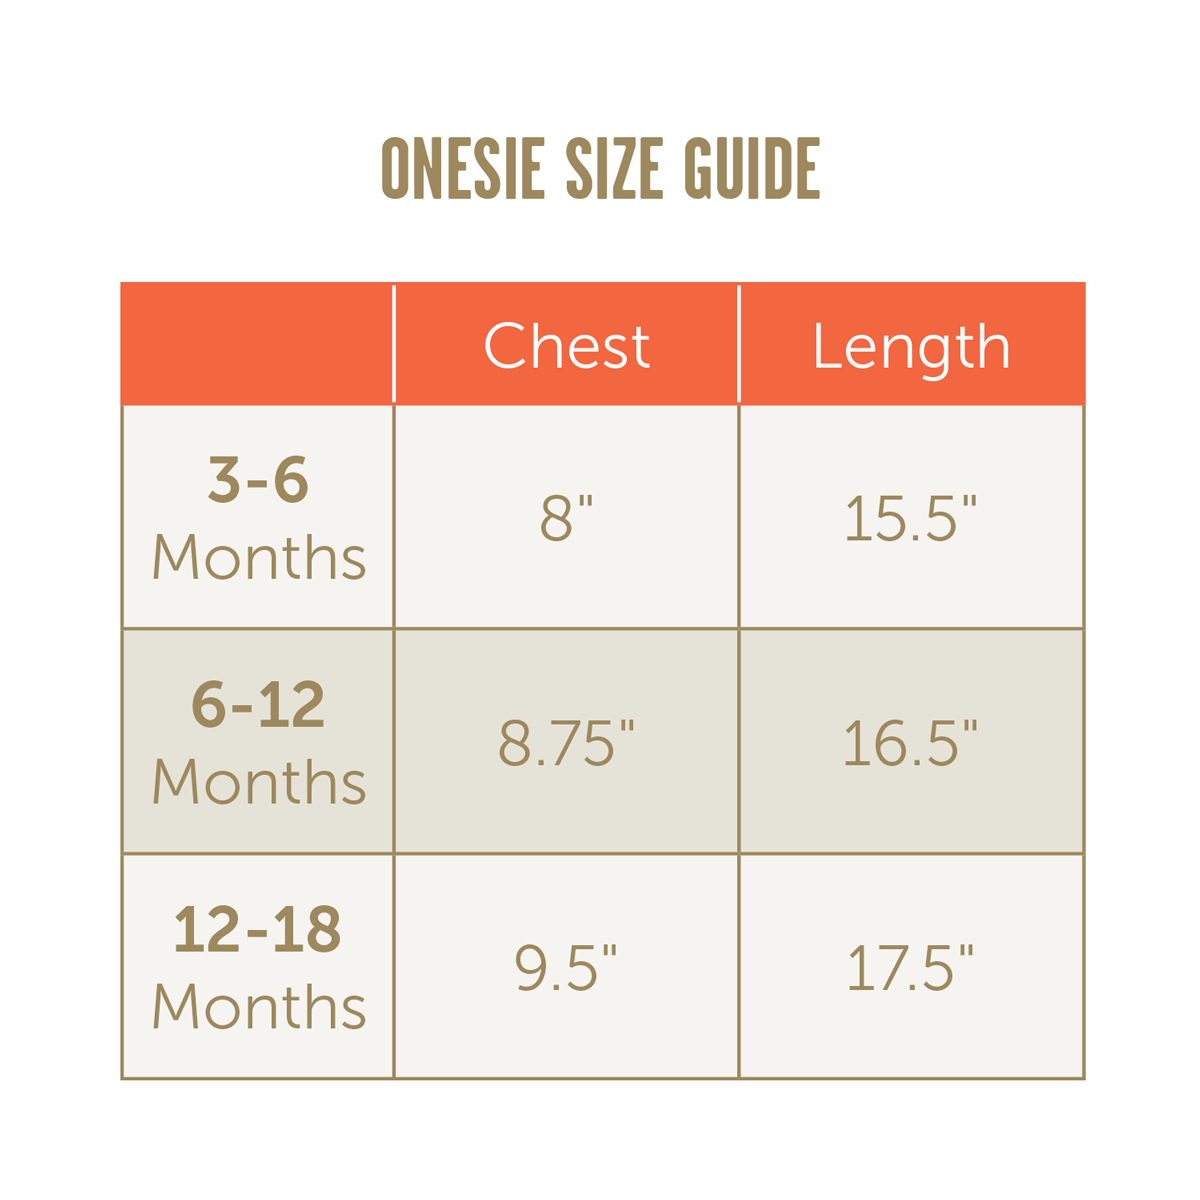 TLE Onesie size guide